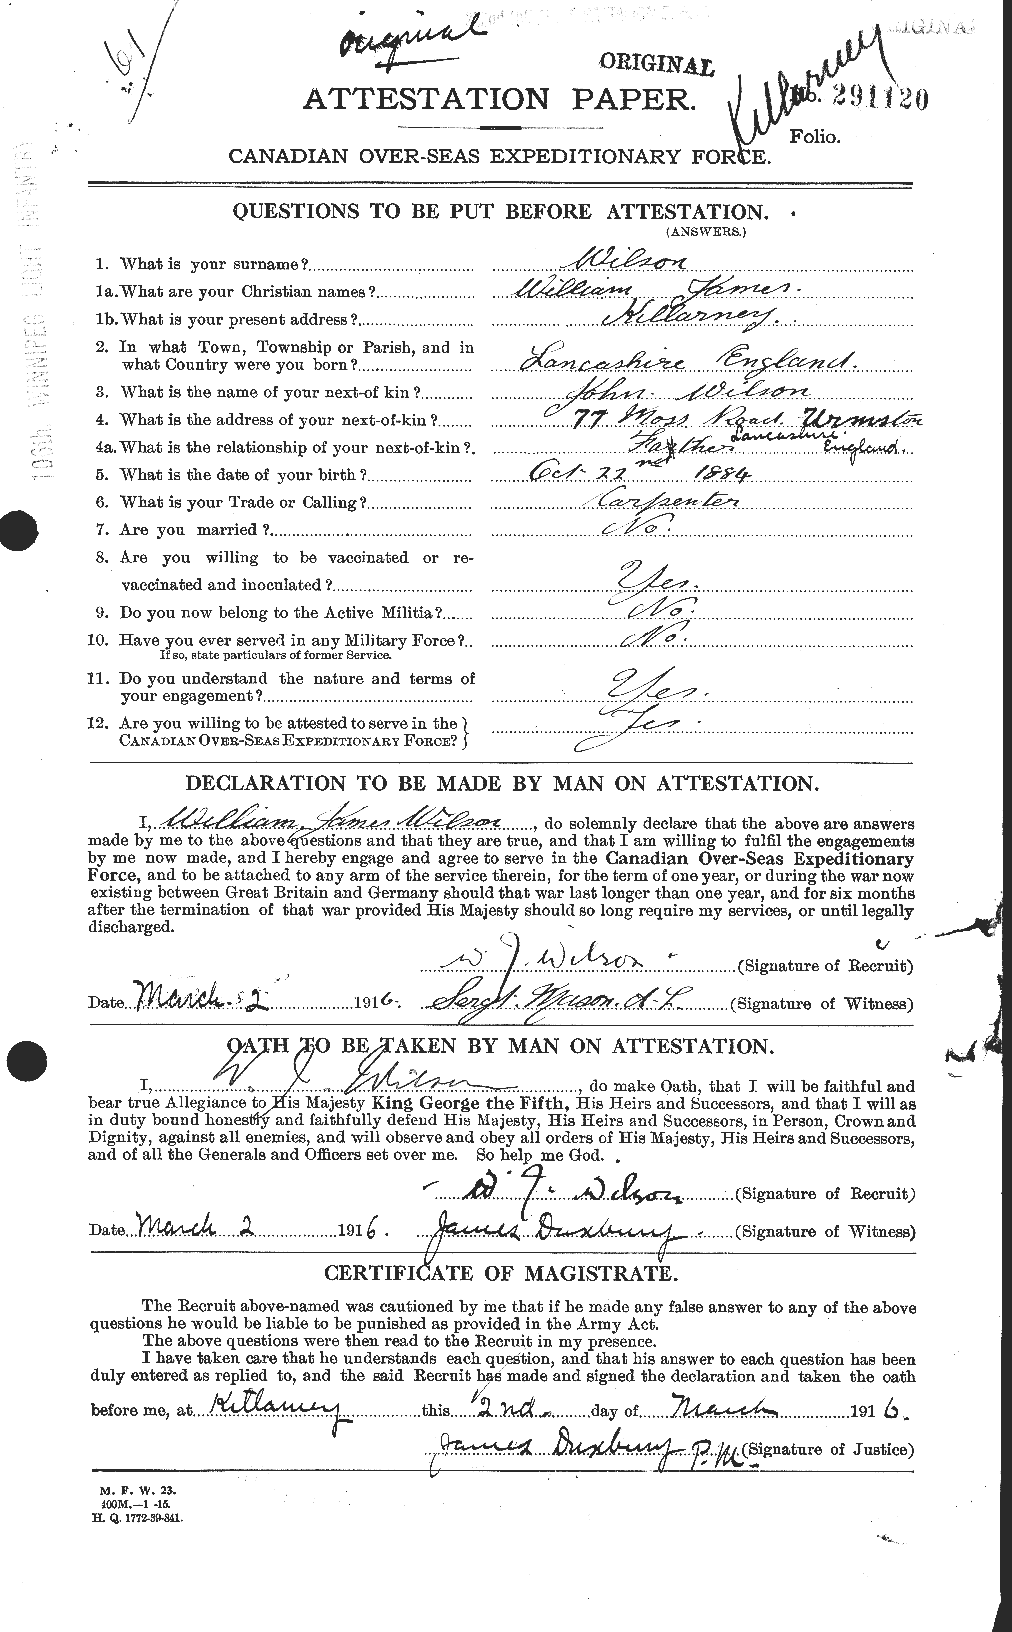 Personnel Records of the First World War - CEF 682050a